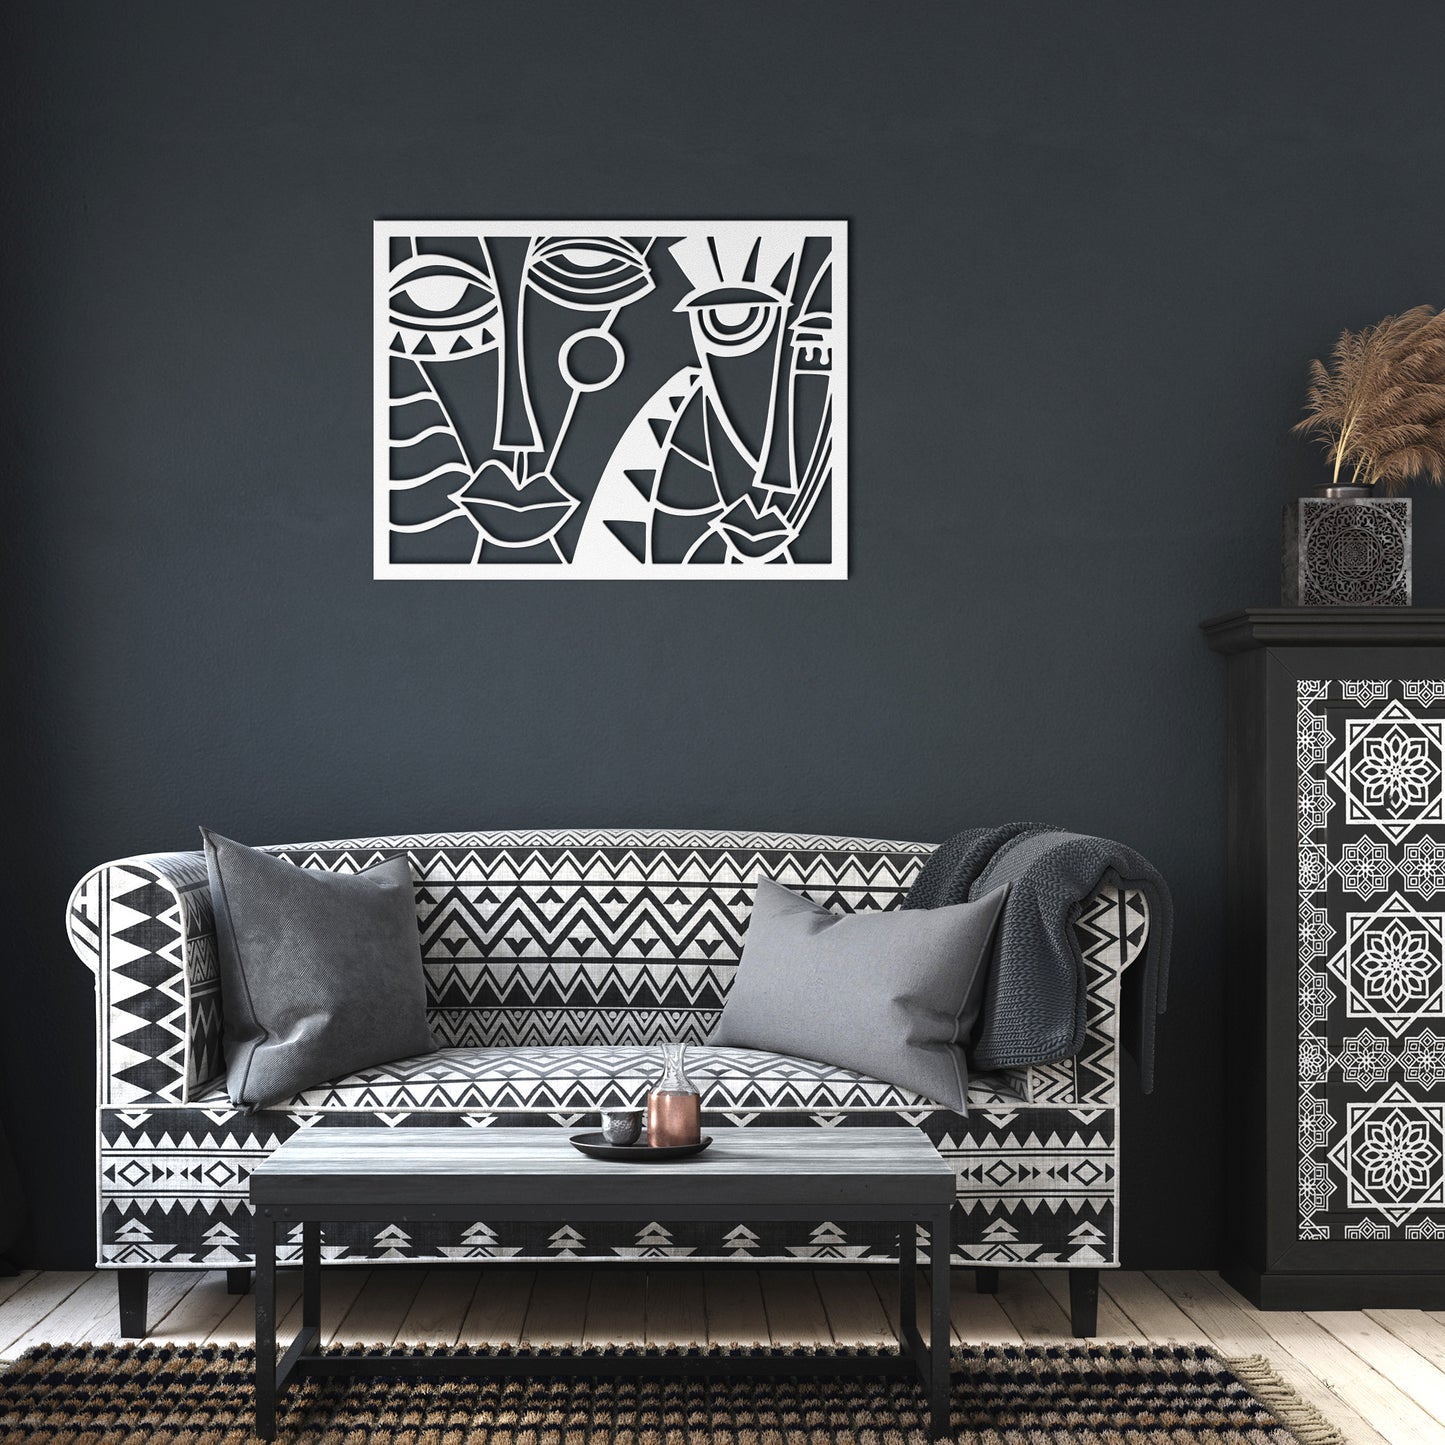 Picasso Inspired Metal Wall Art